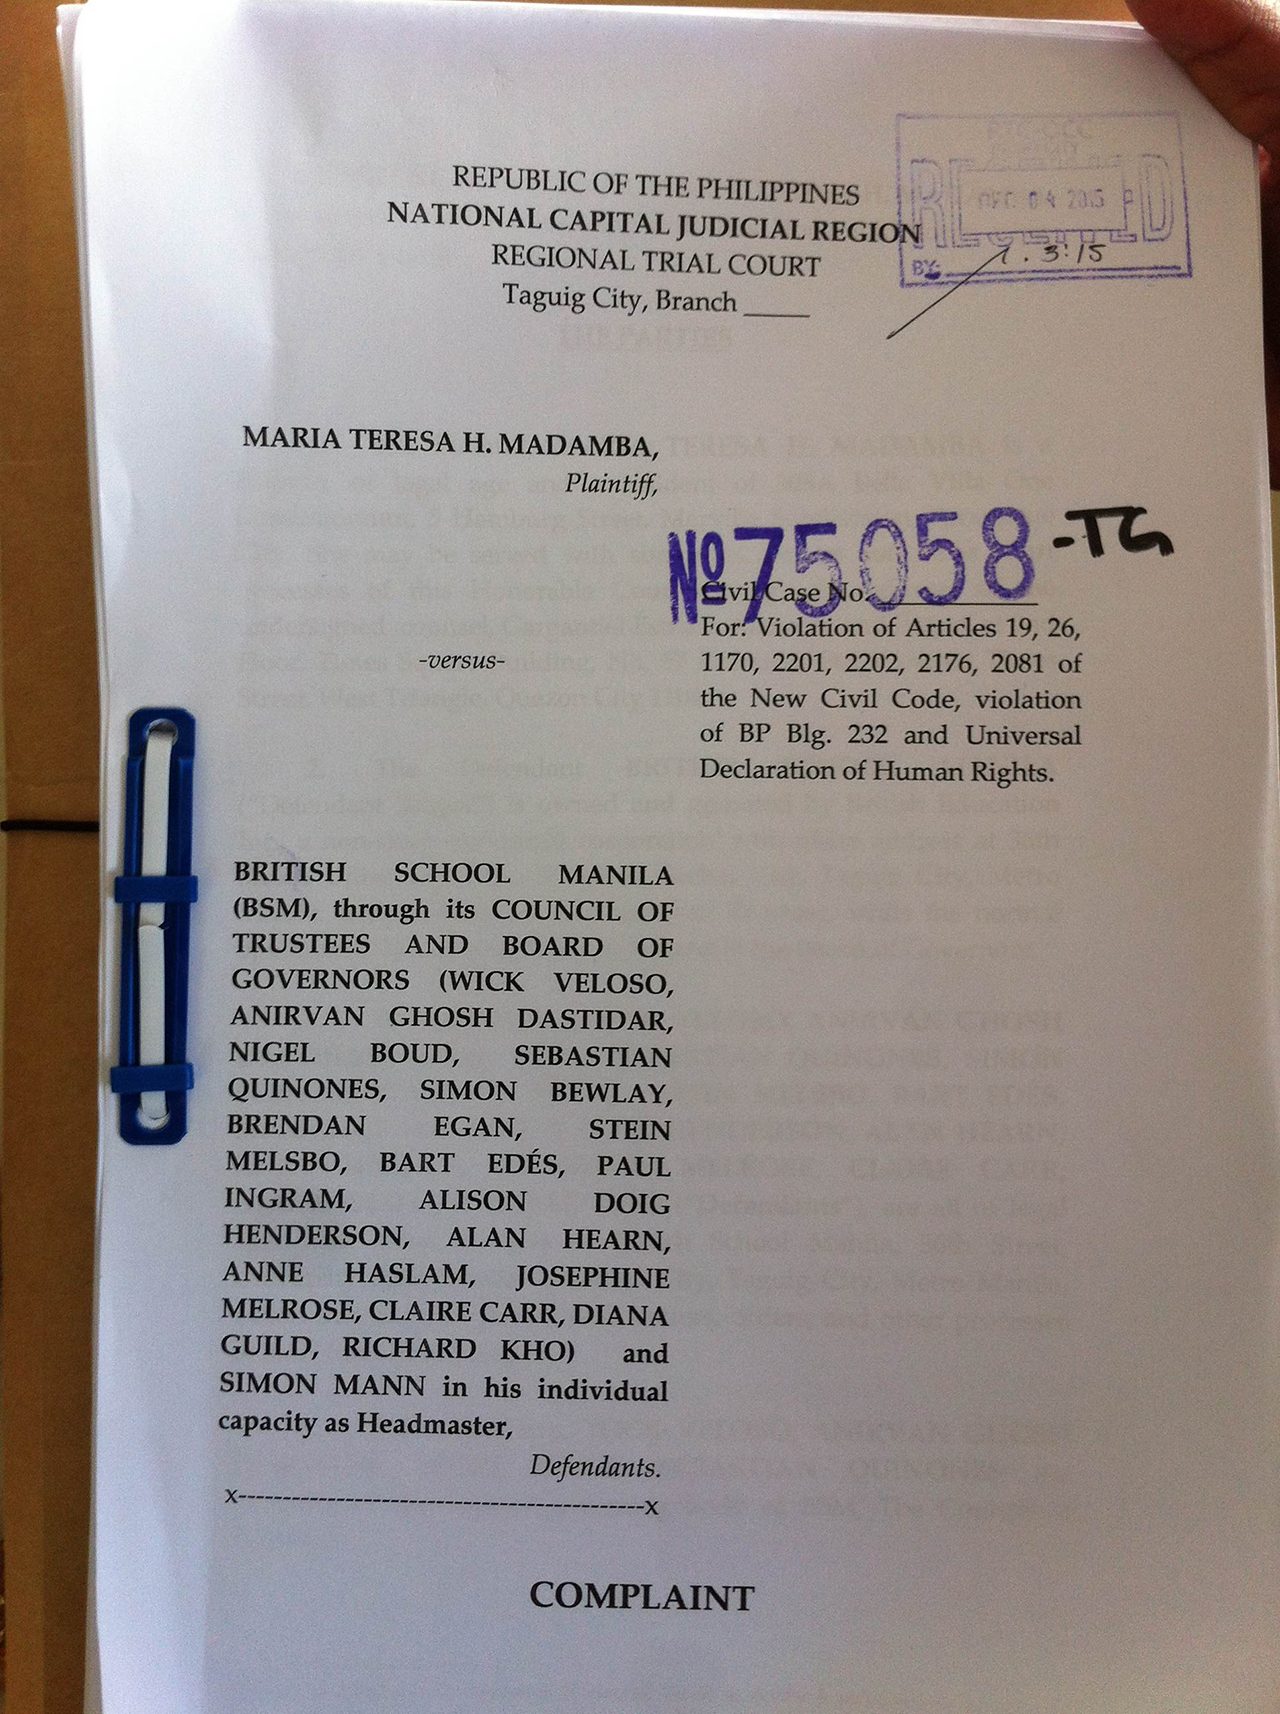 3RD COMPLAINT. The damage suit filed before the Taguig Regional Trial Court Friday, December 4, is the 3rd complaint filed by Trixie Madamba against the British School Manila. Photo from Trixie Madamba  